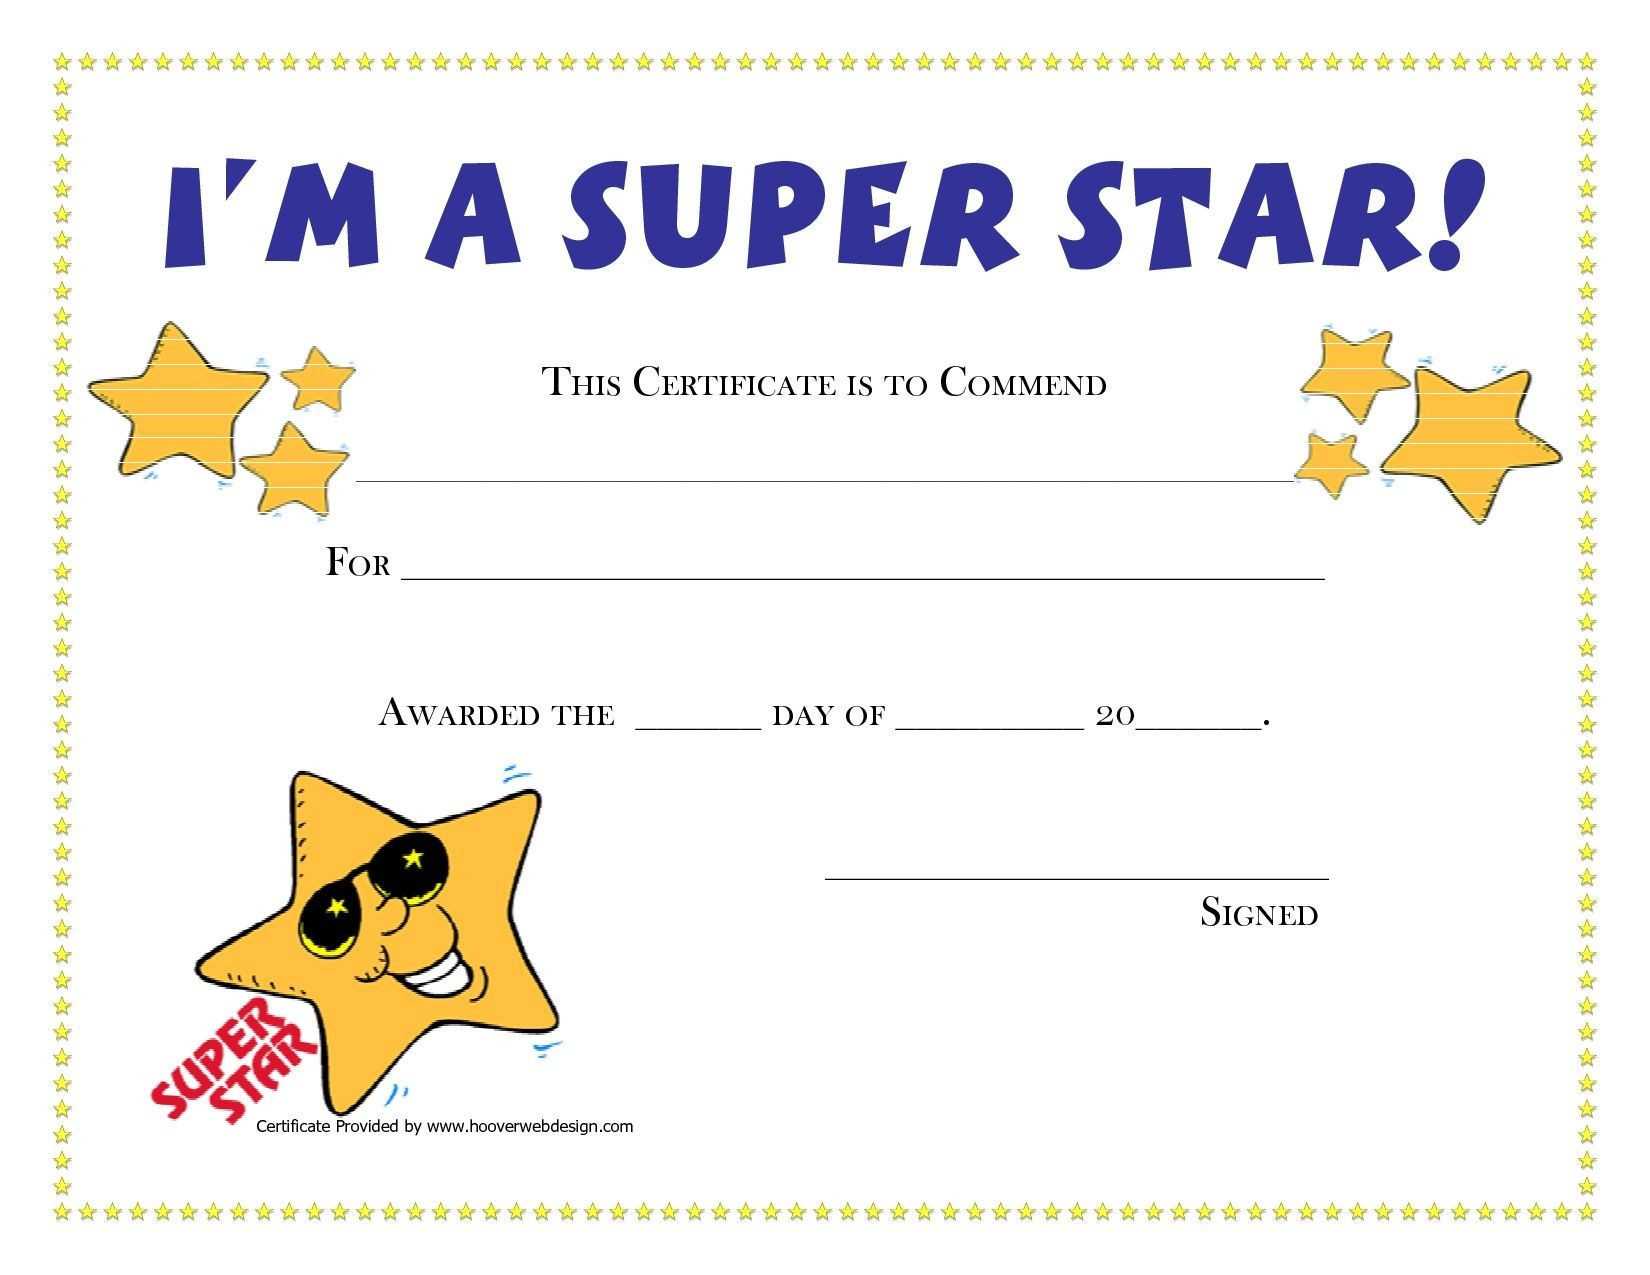 Reproducible Student Worksheet or Free Printable Award Certificates for Elementary Students Awesome